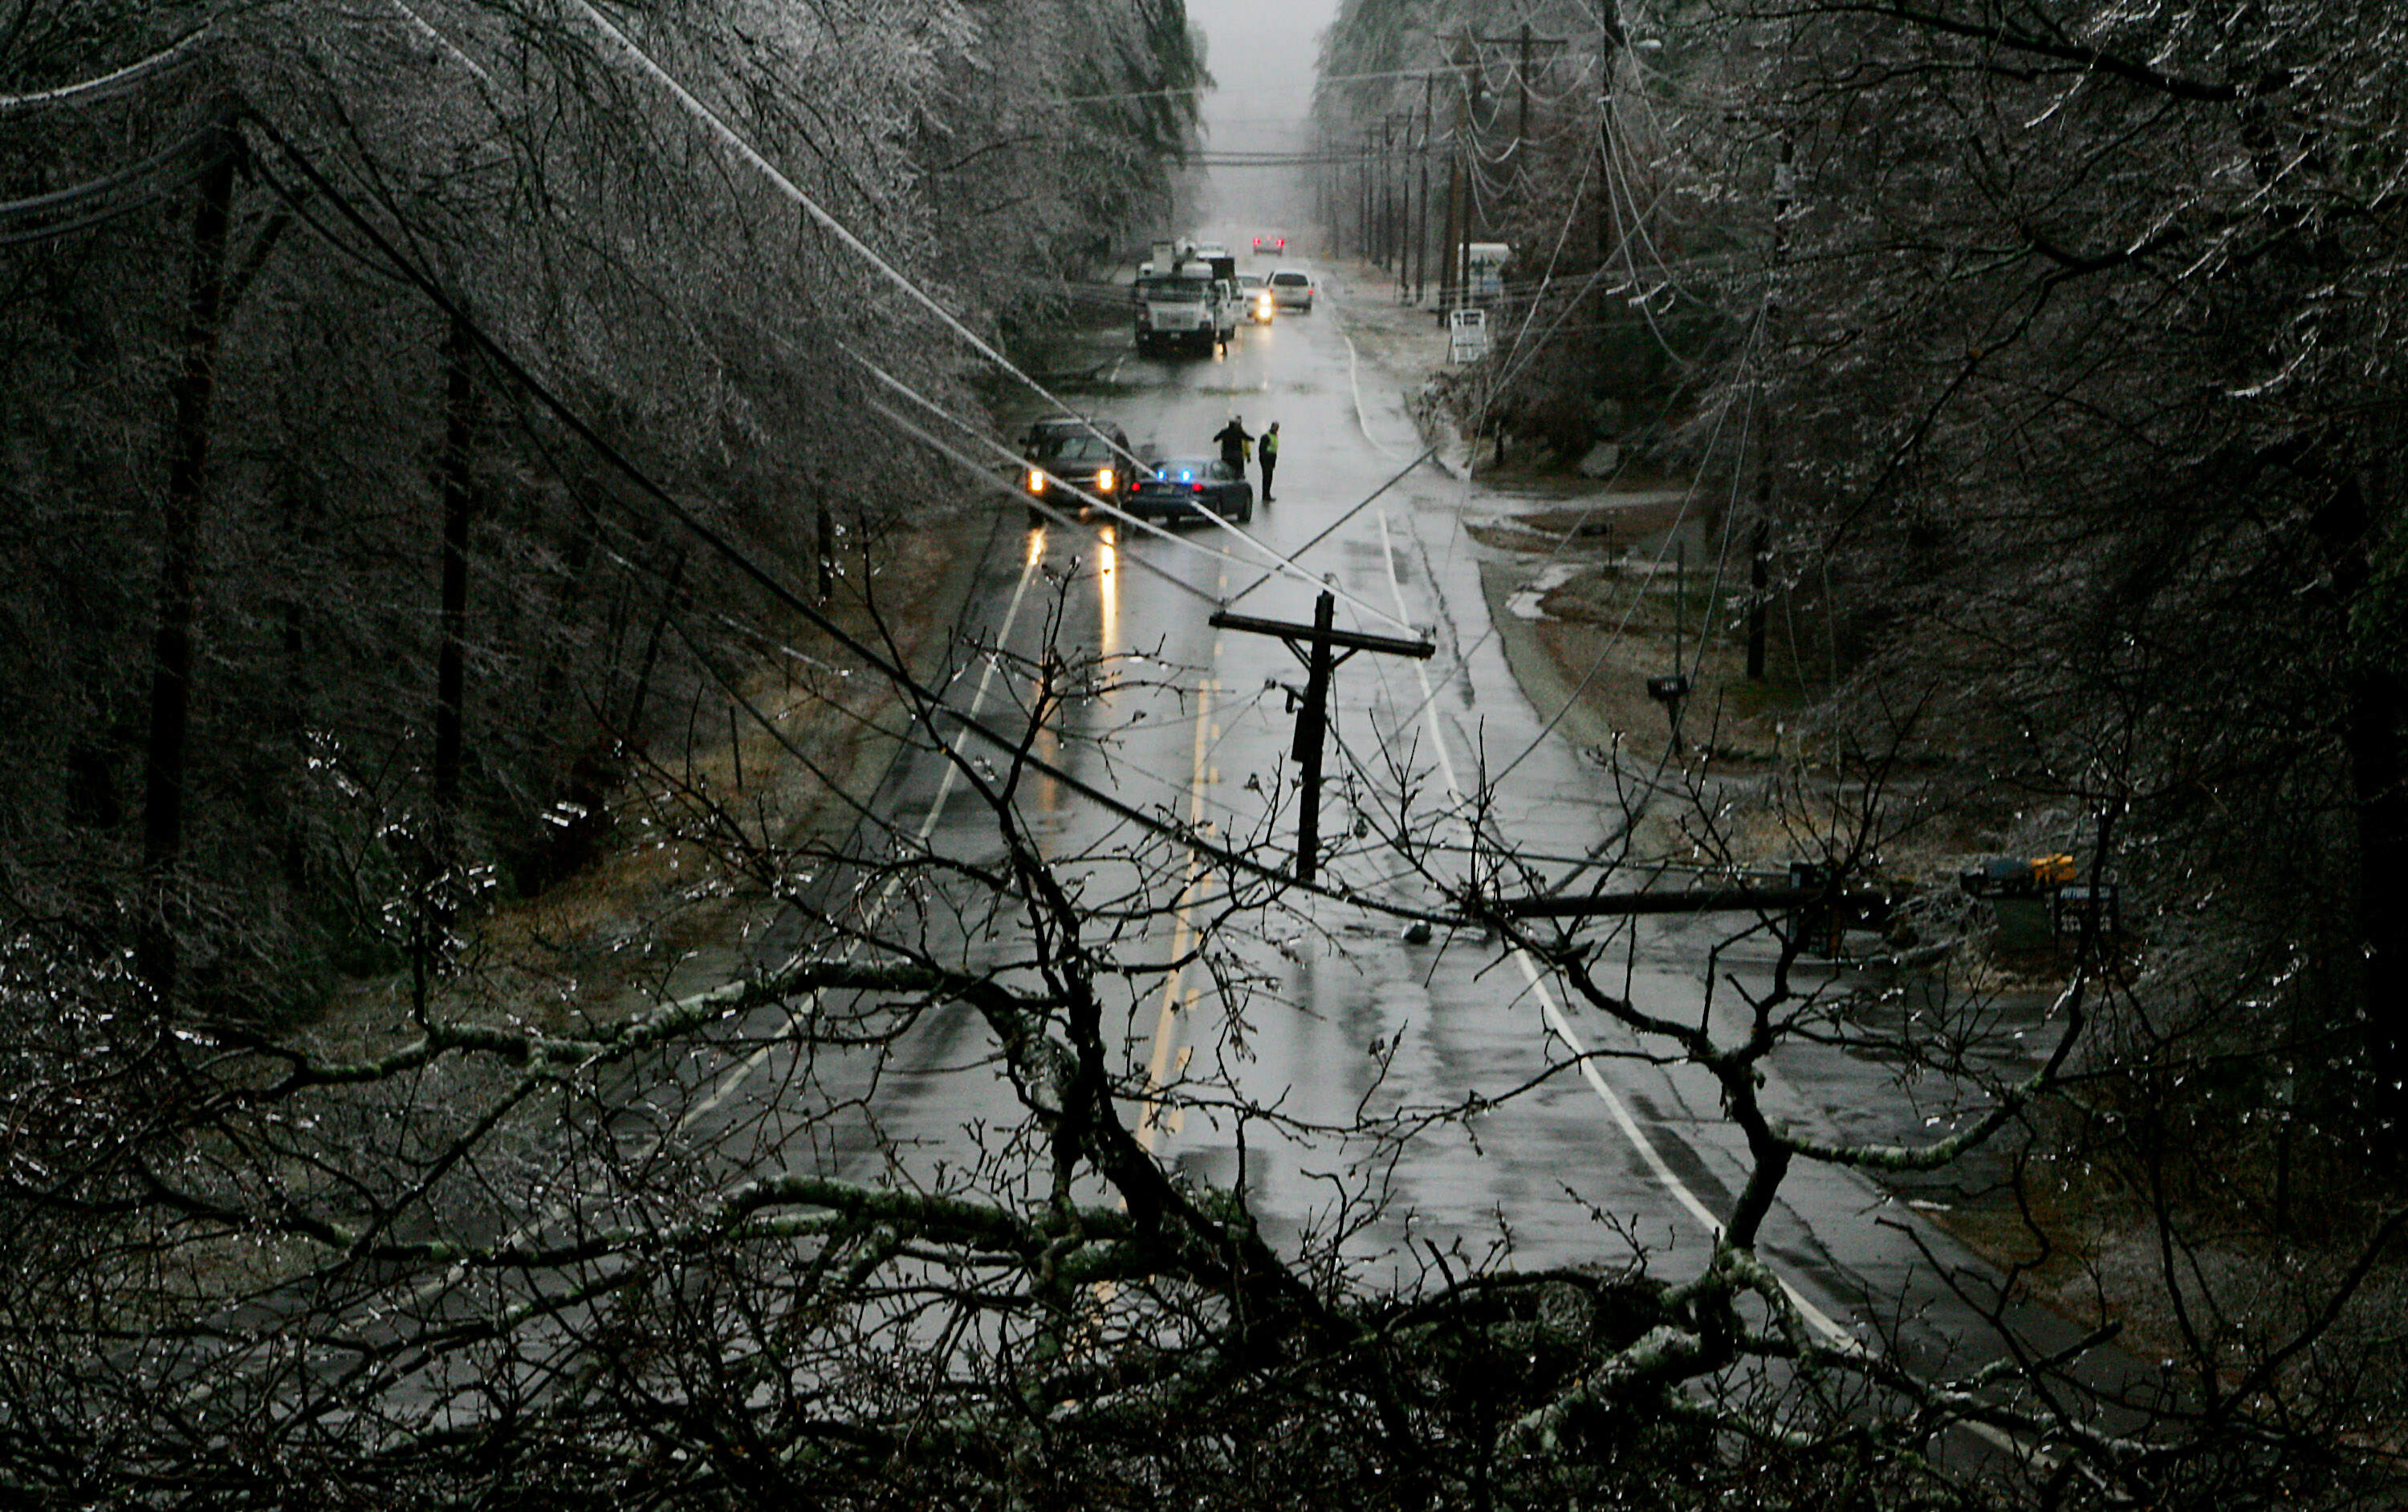 Traffic is redirected in Derry, N.H. after a utility pole snapped due to an overnight ice storm Friday, Dec. 12, 2008. The ice storm knocked out power to more than a half-million homes and businesses in New England and upstate New York. (Cheryl Senter/AP)